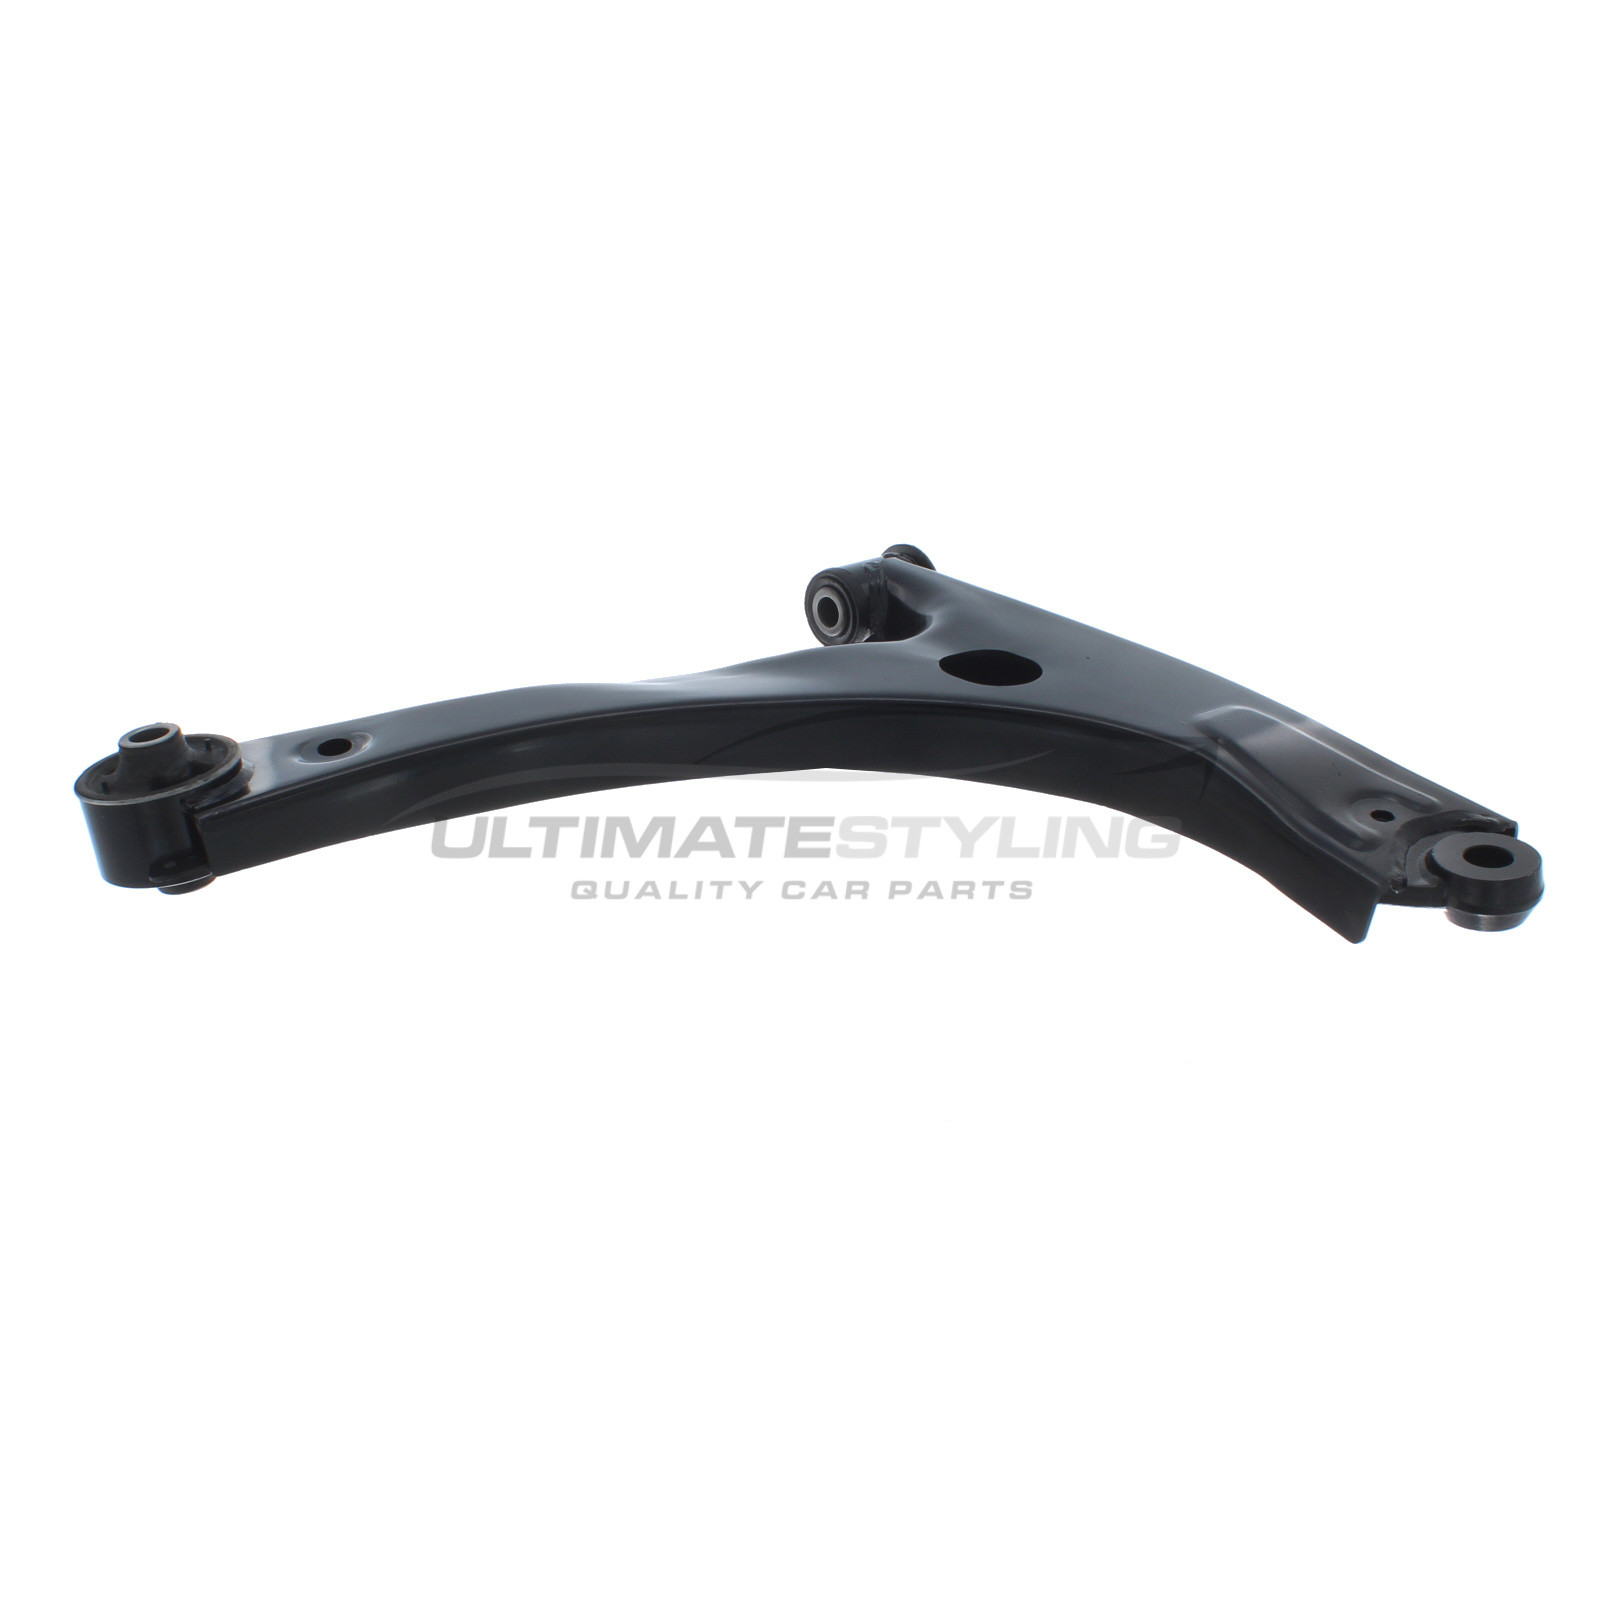 Suspension Arm for Ford Transit